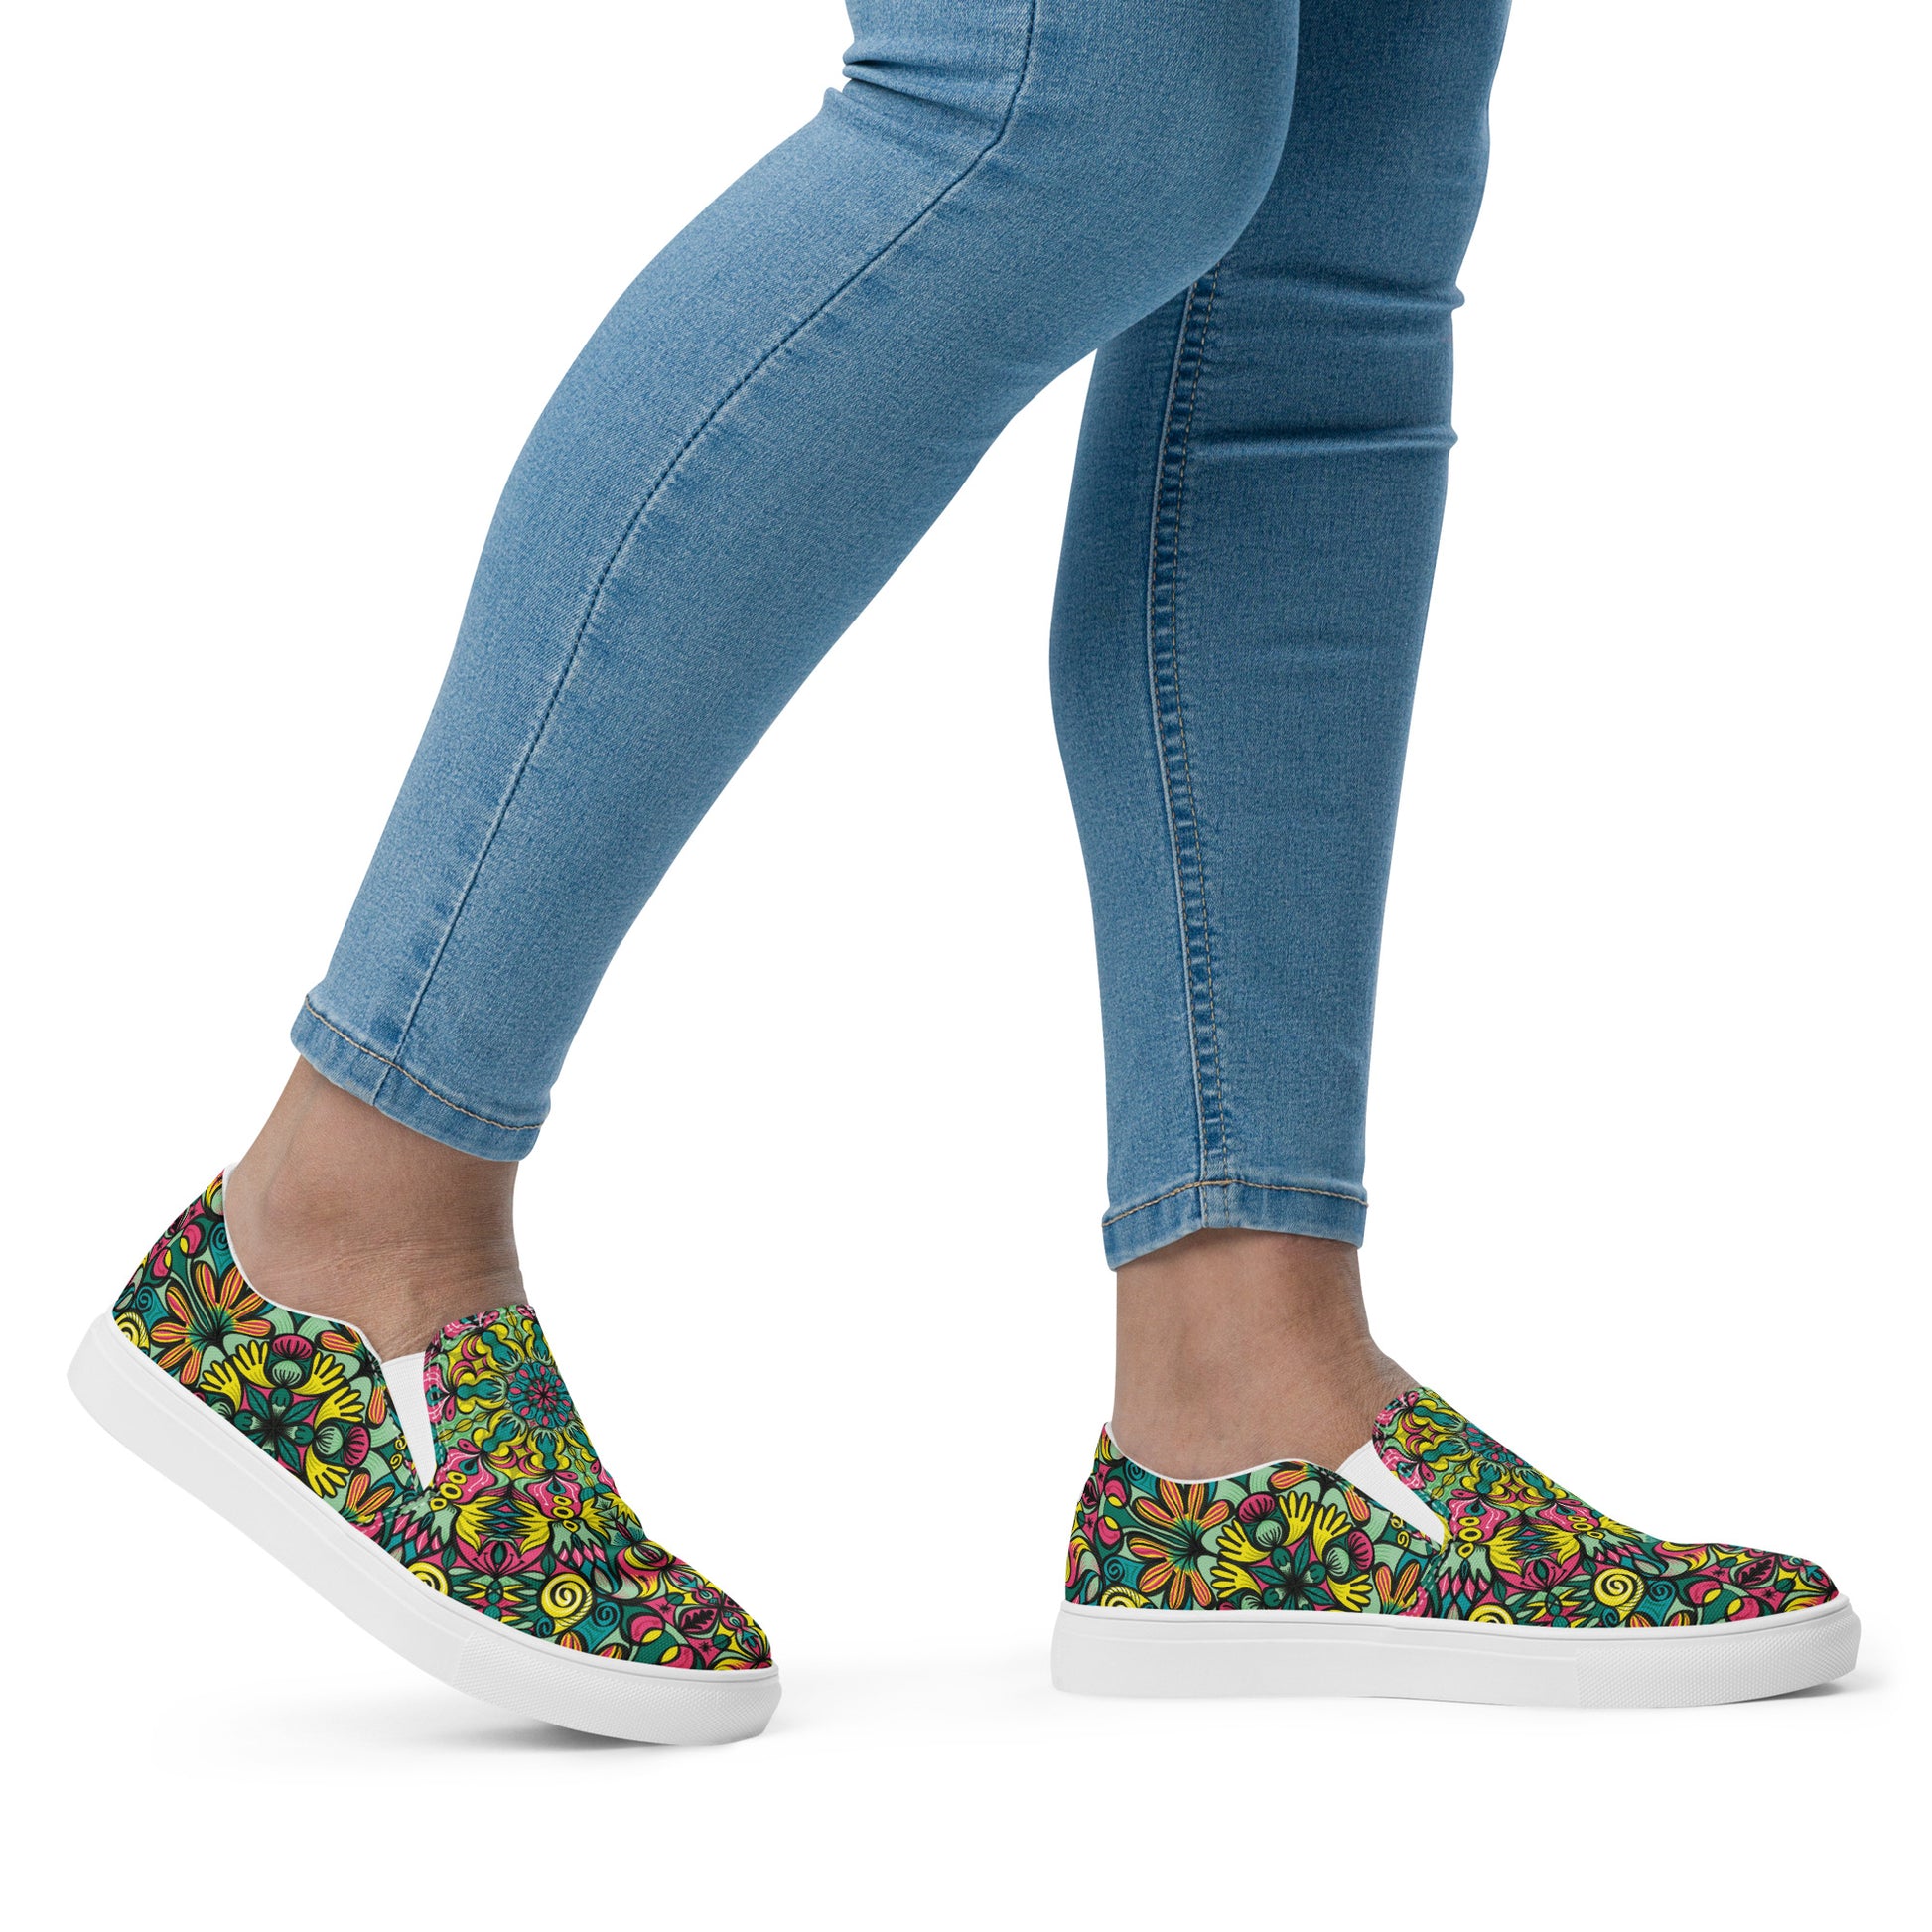 Exploring Jungle Oddities: Inspiration from the Fascinating Wildflowers of the Tropics. Women’s slip-on canvas shoes. Side view